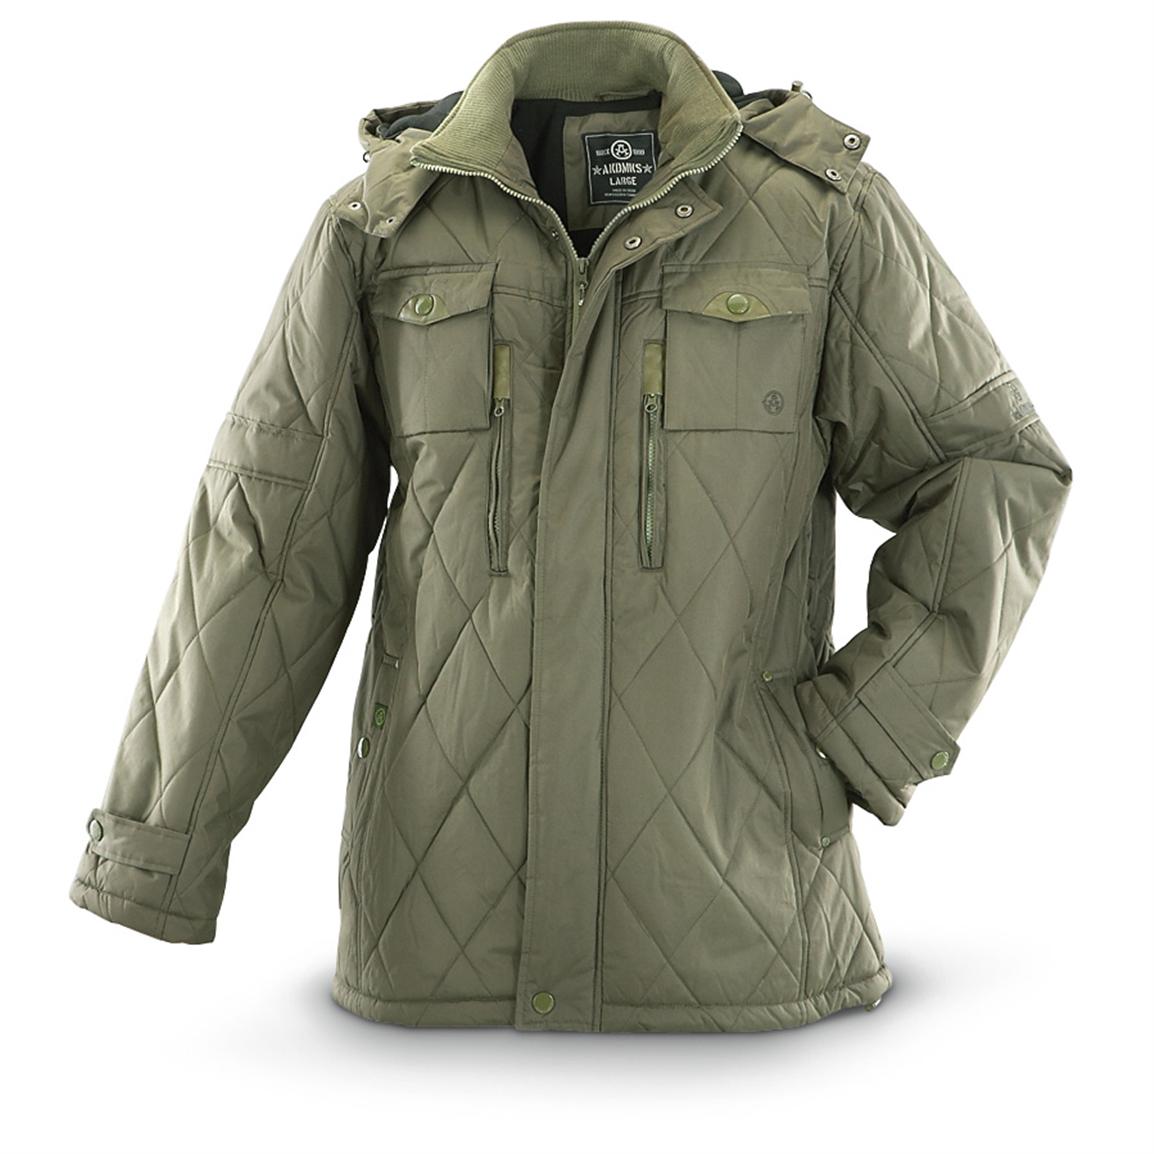 Explorer Jacket - 581942, Insulated Jackets & Coats at Sportsman's Guide